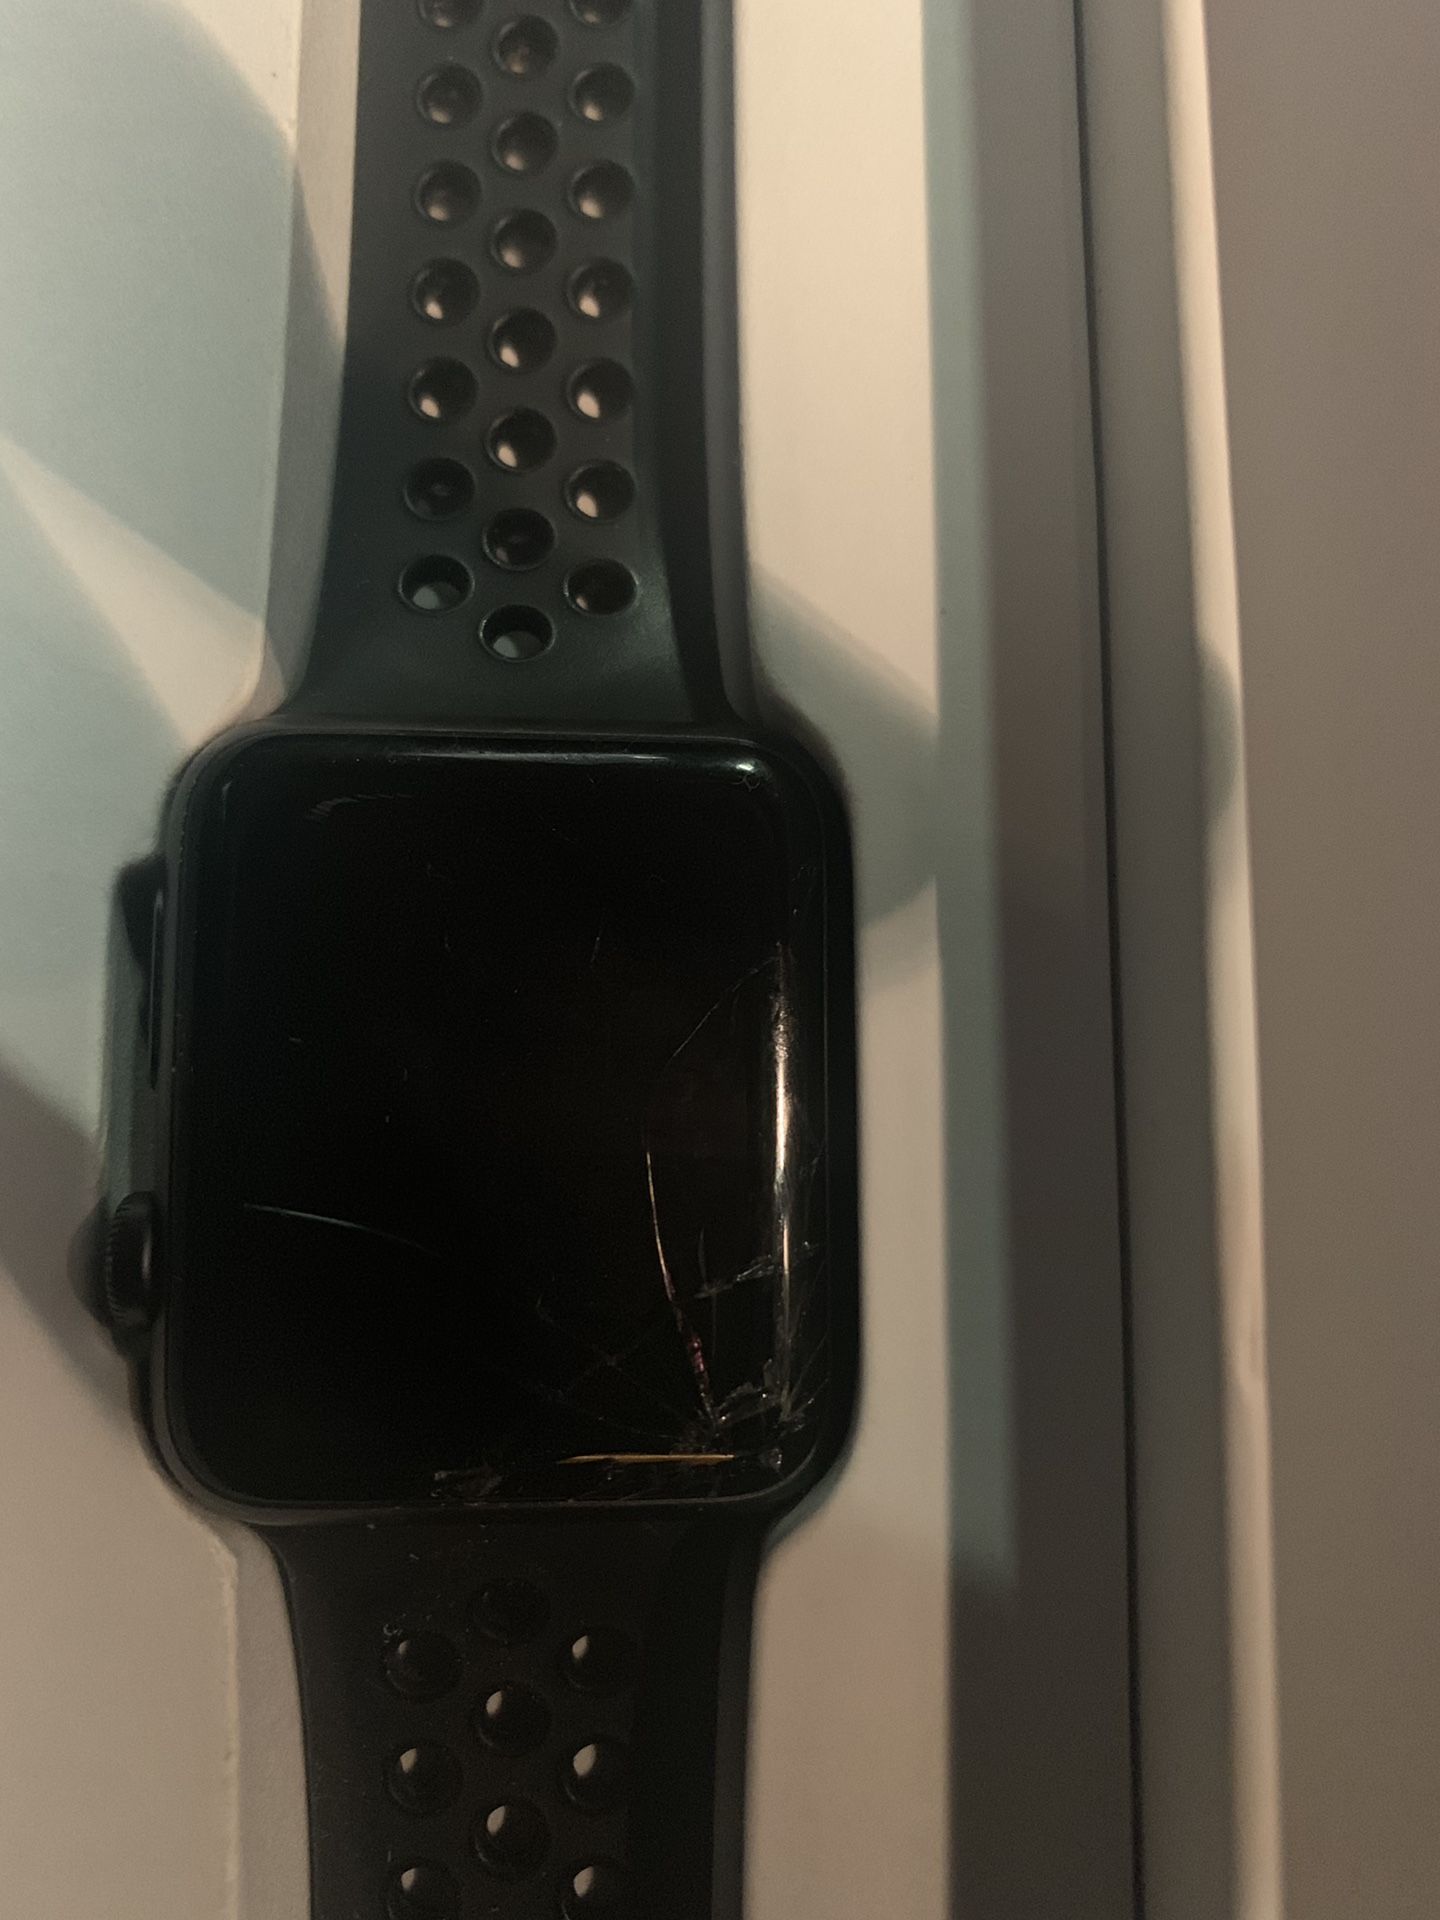 Apple Watch Series 1 (cracked but still works great)